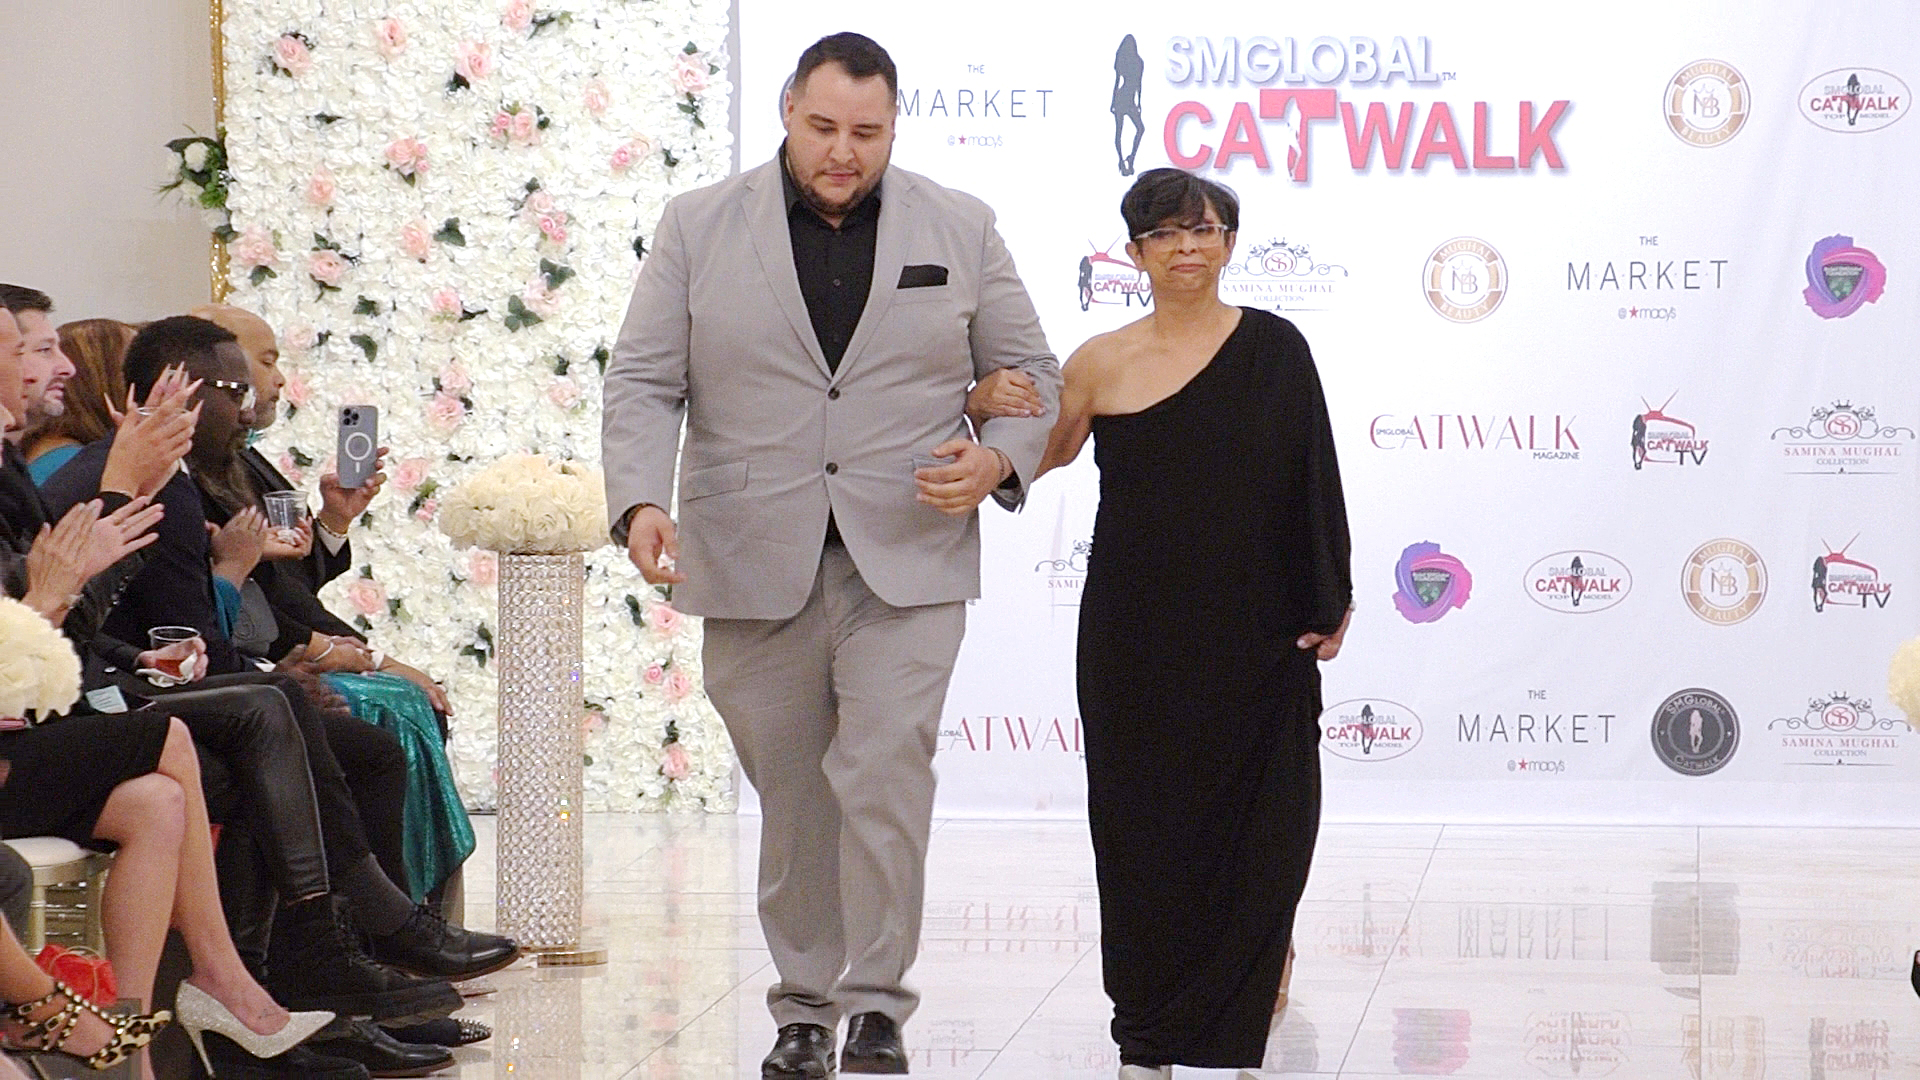 Brave Stage 4 Survivor Graces the Runway to Create Awareness for a Rare Liver Cancer